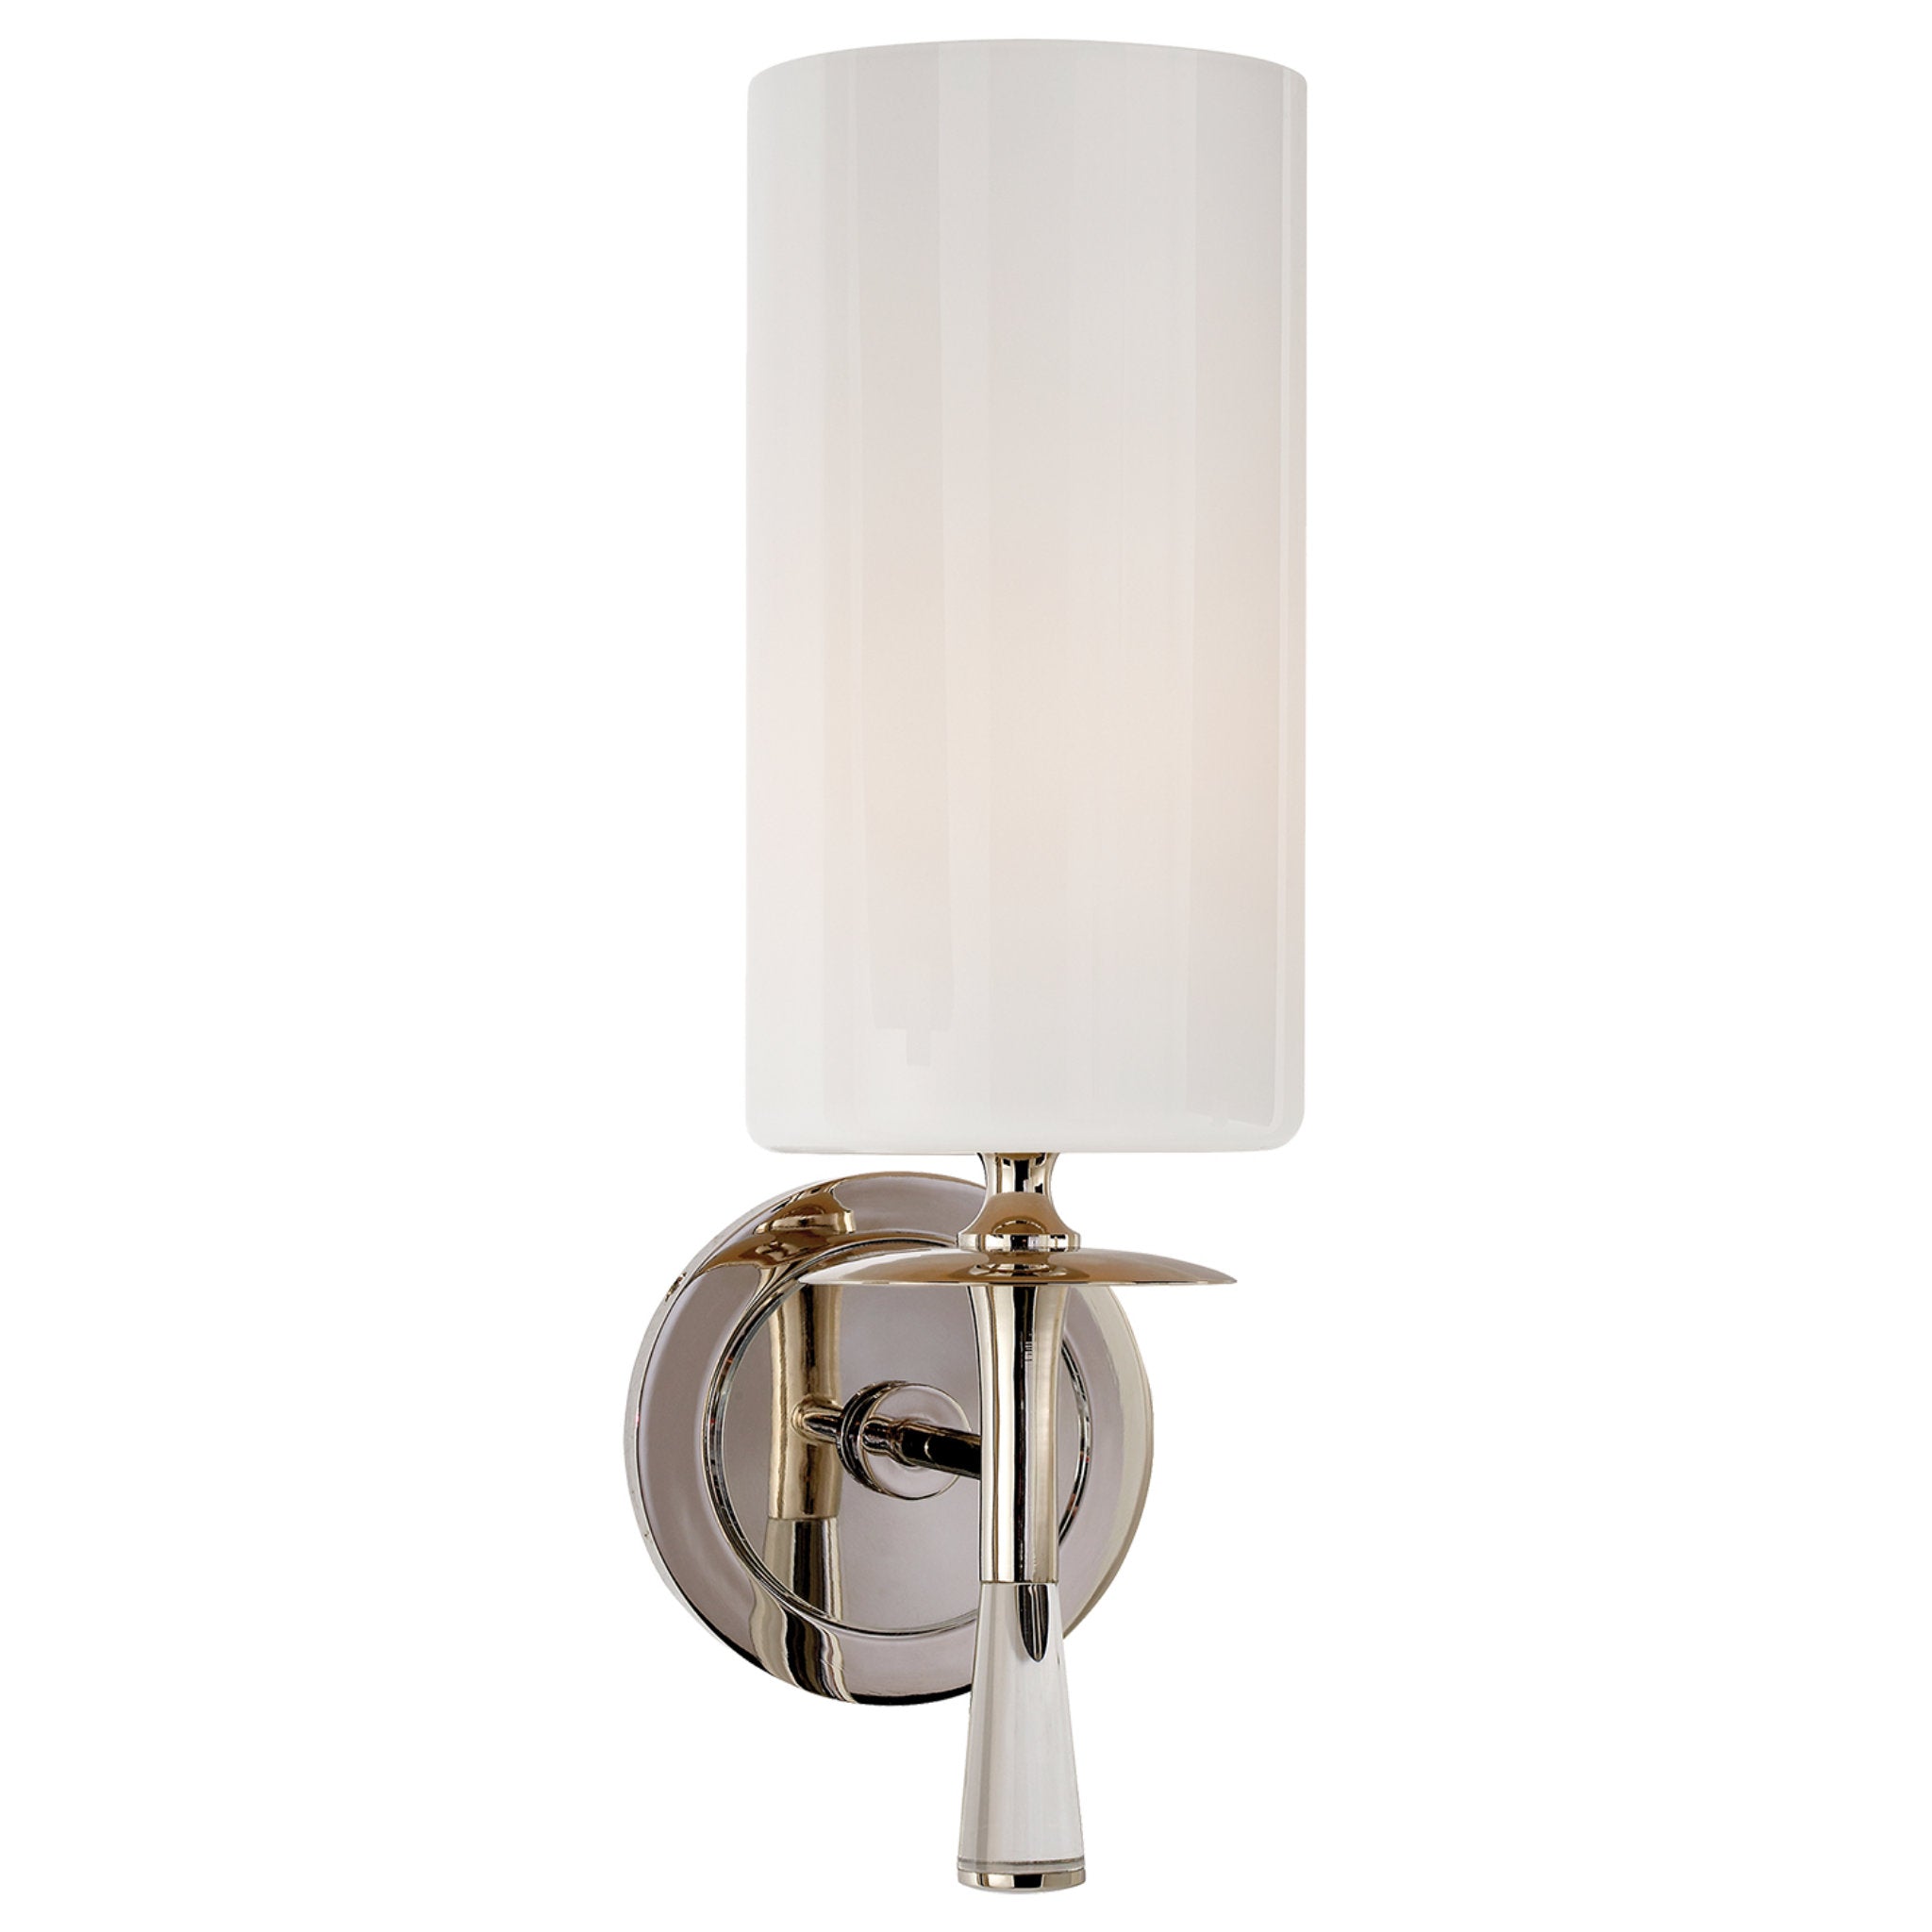 AERIN Drunmore Single Sconce in Polished Nickel and Crystal with White Glass Shade